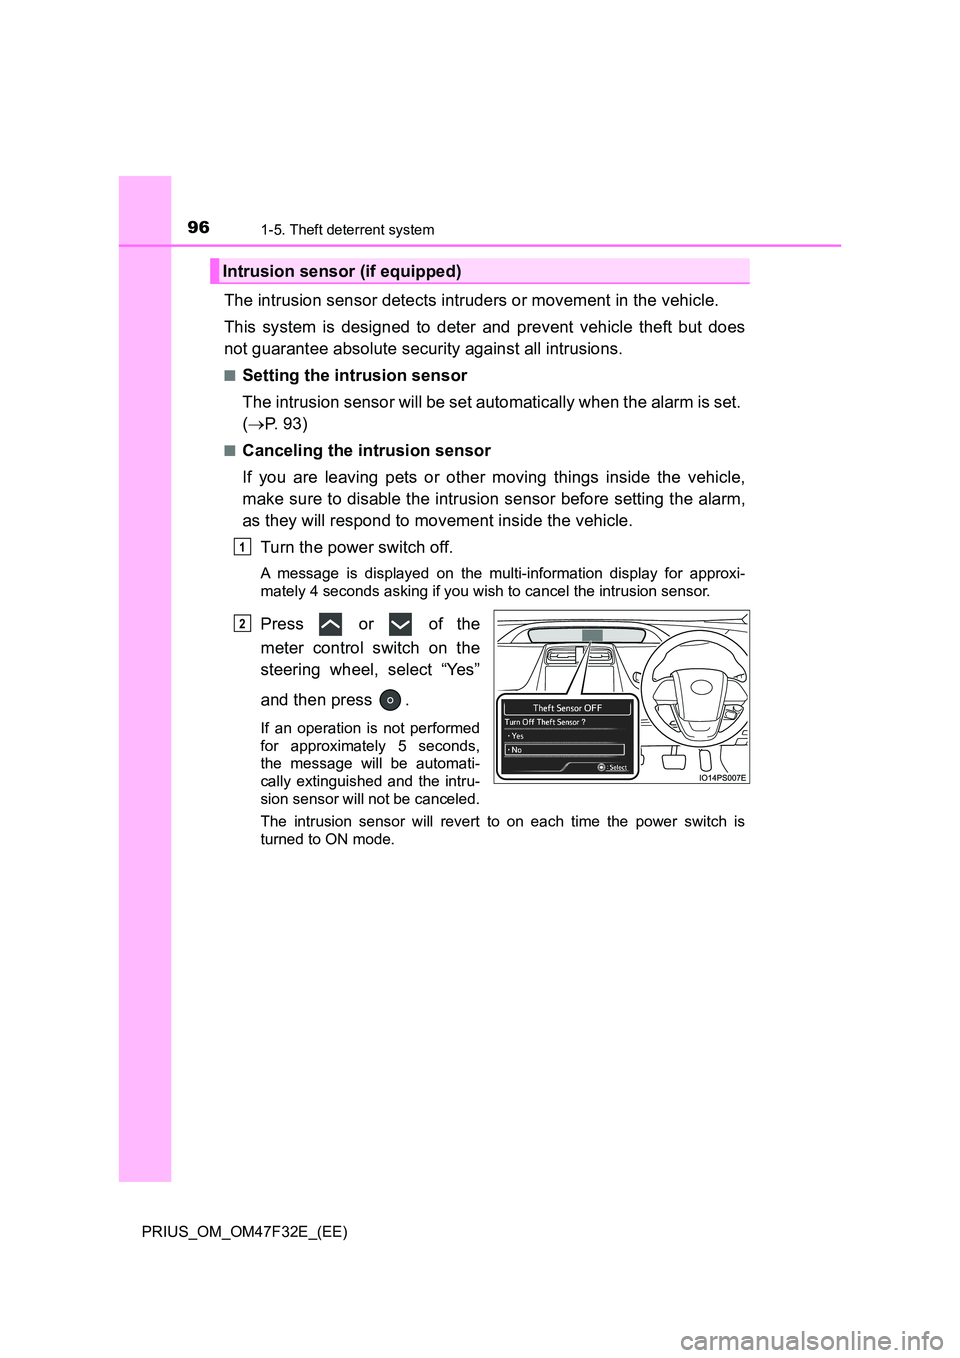 TOYOTA PRIUS 2023  Owners Manual 961-5. Theft deterrent system
PRIUS_OM_OM47F32E_(EE)
The intrusion sensor detects intruders or movement in the vehicle. 
This system is designed to deter and prevent vehicle theft but does 
not guaran